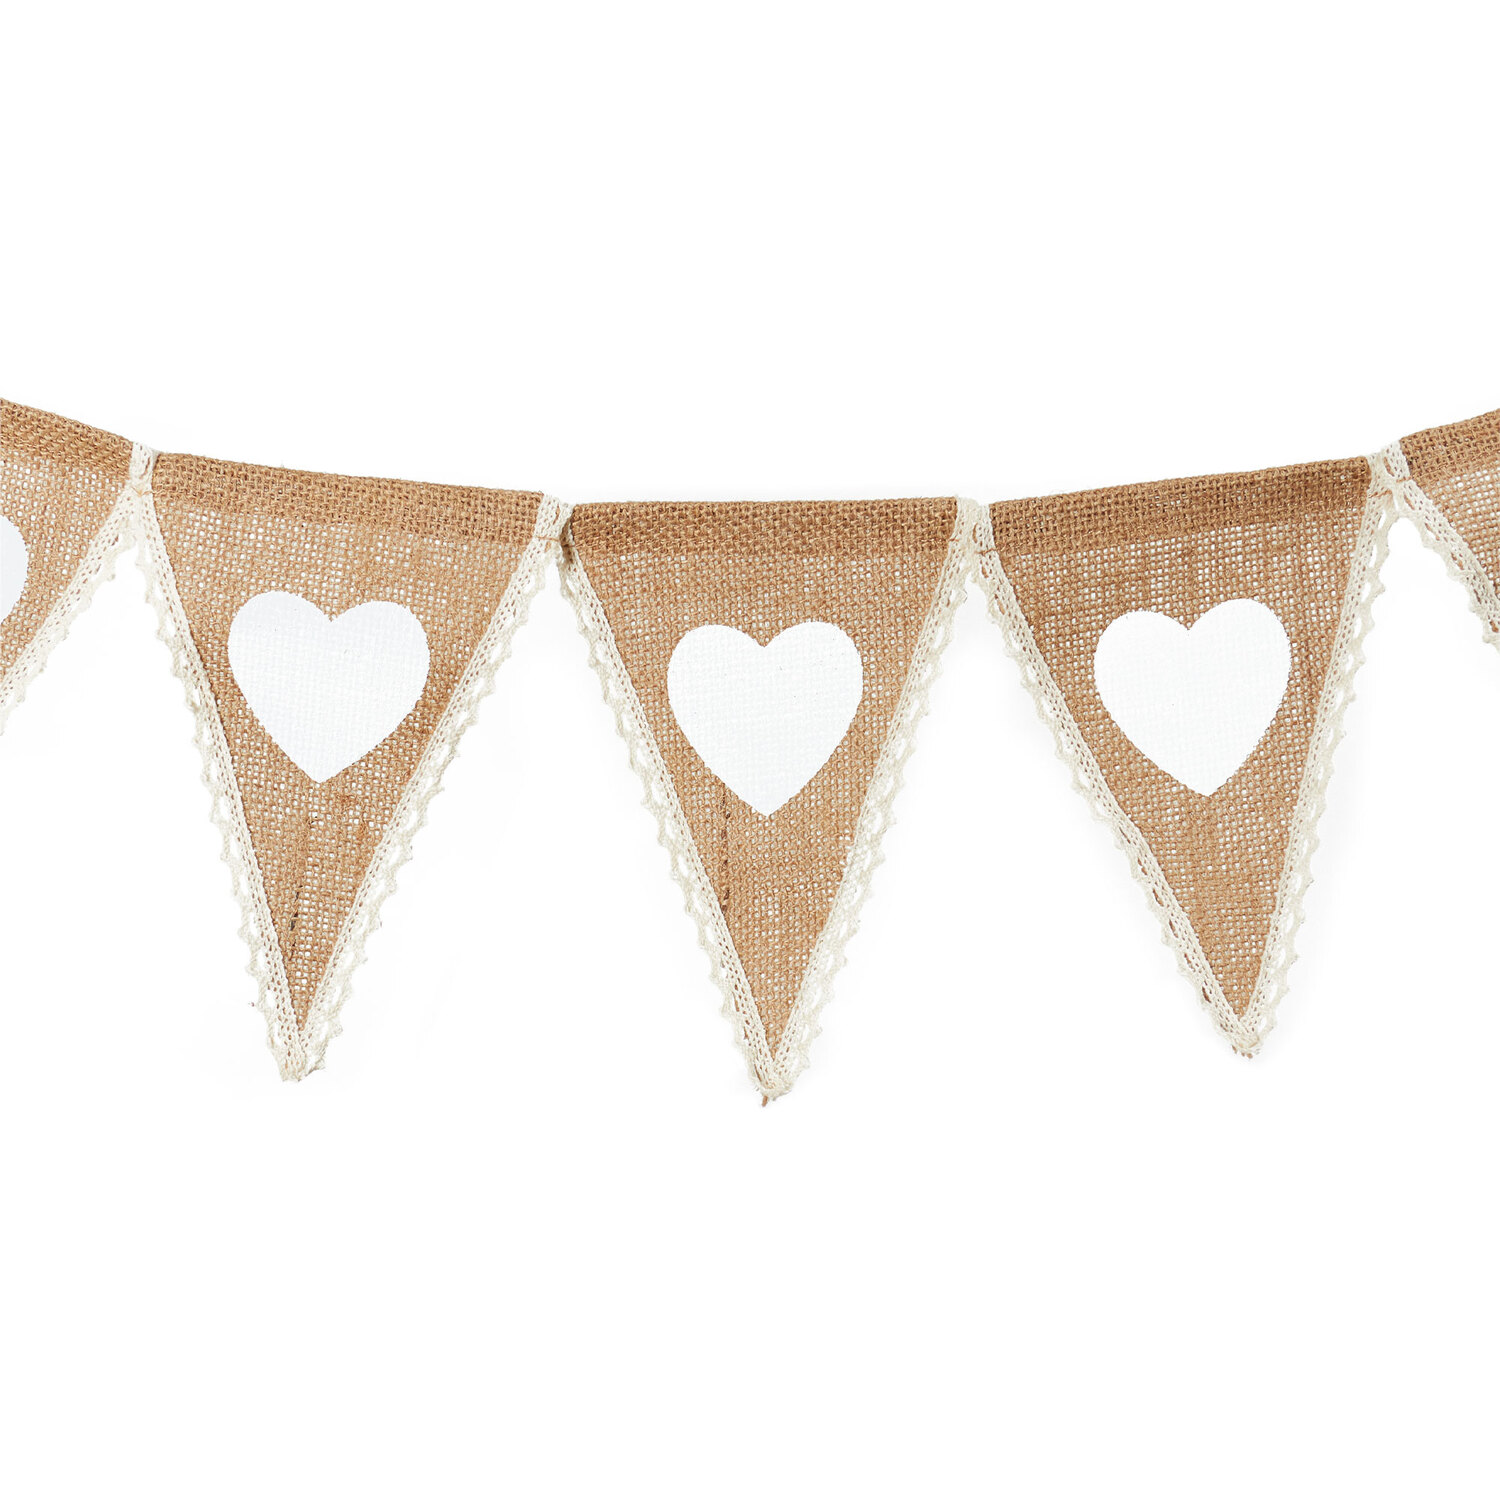 Hessian & Lace Heart Bunting - Natural Image 3